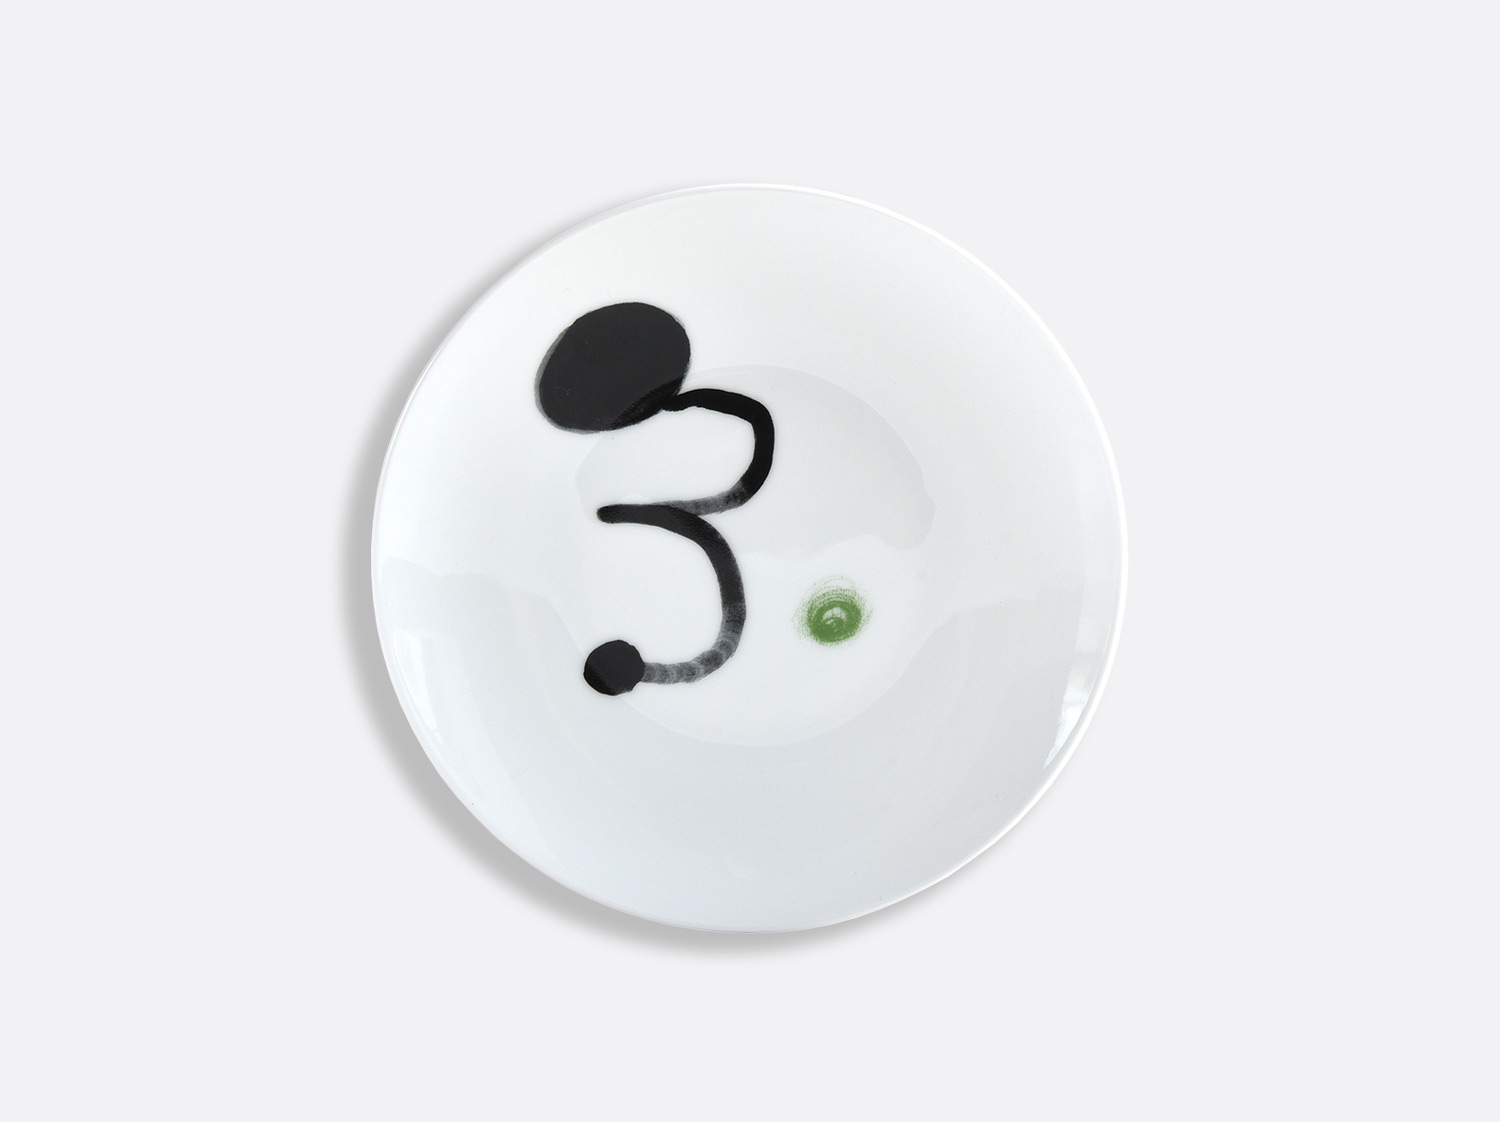 China 2 Bread and butter plates 6.5" Vert Clair - Page 52 of the collection PARLER SEUL - Joan Miro | Bernardaud